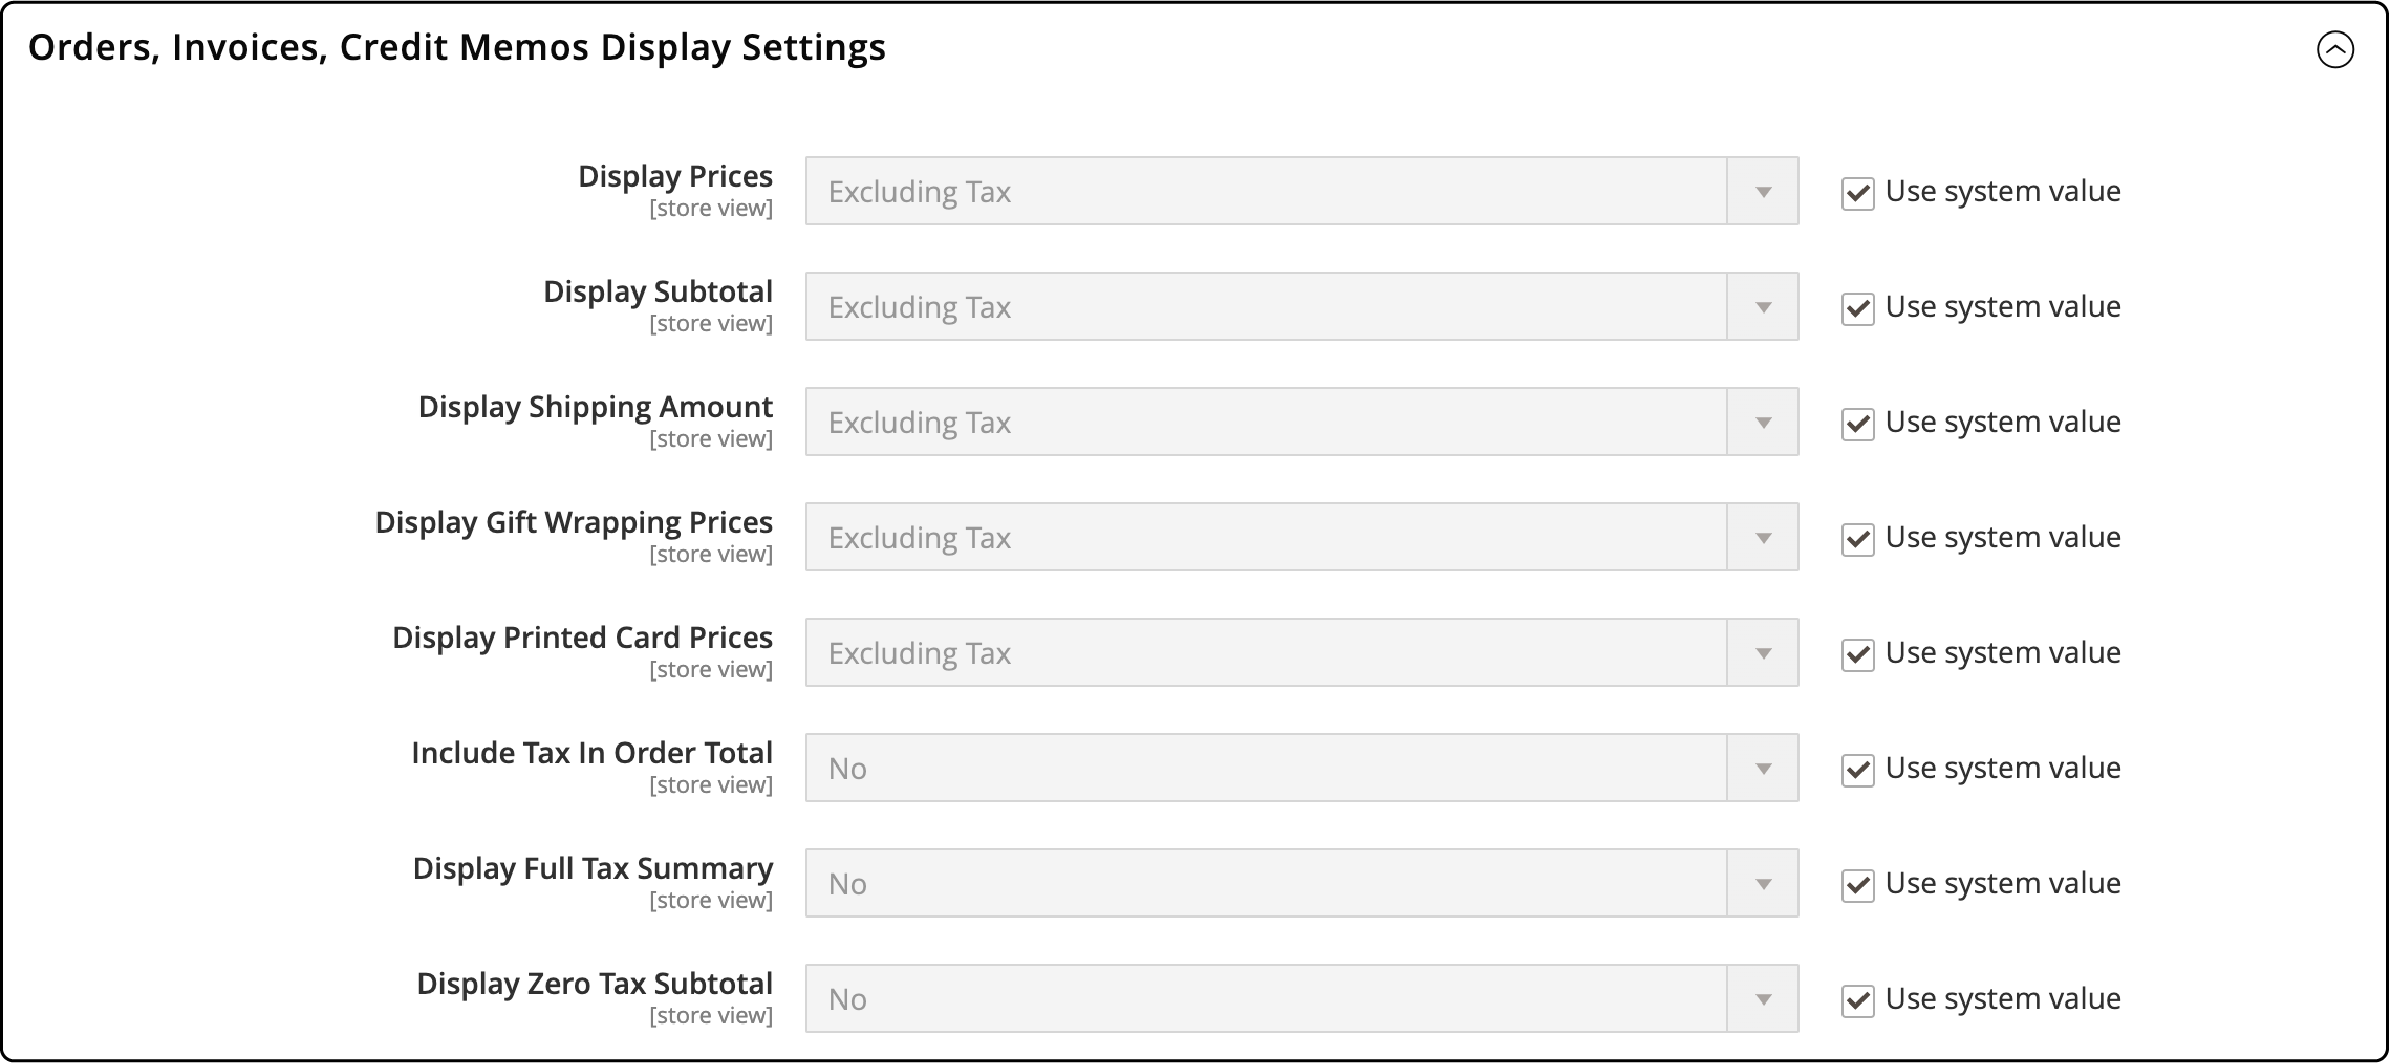 Display Settings for Orders, Invoices, and Credit Memos in Magento 2
